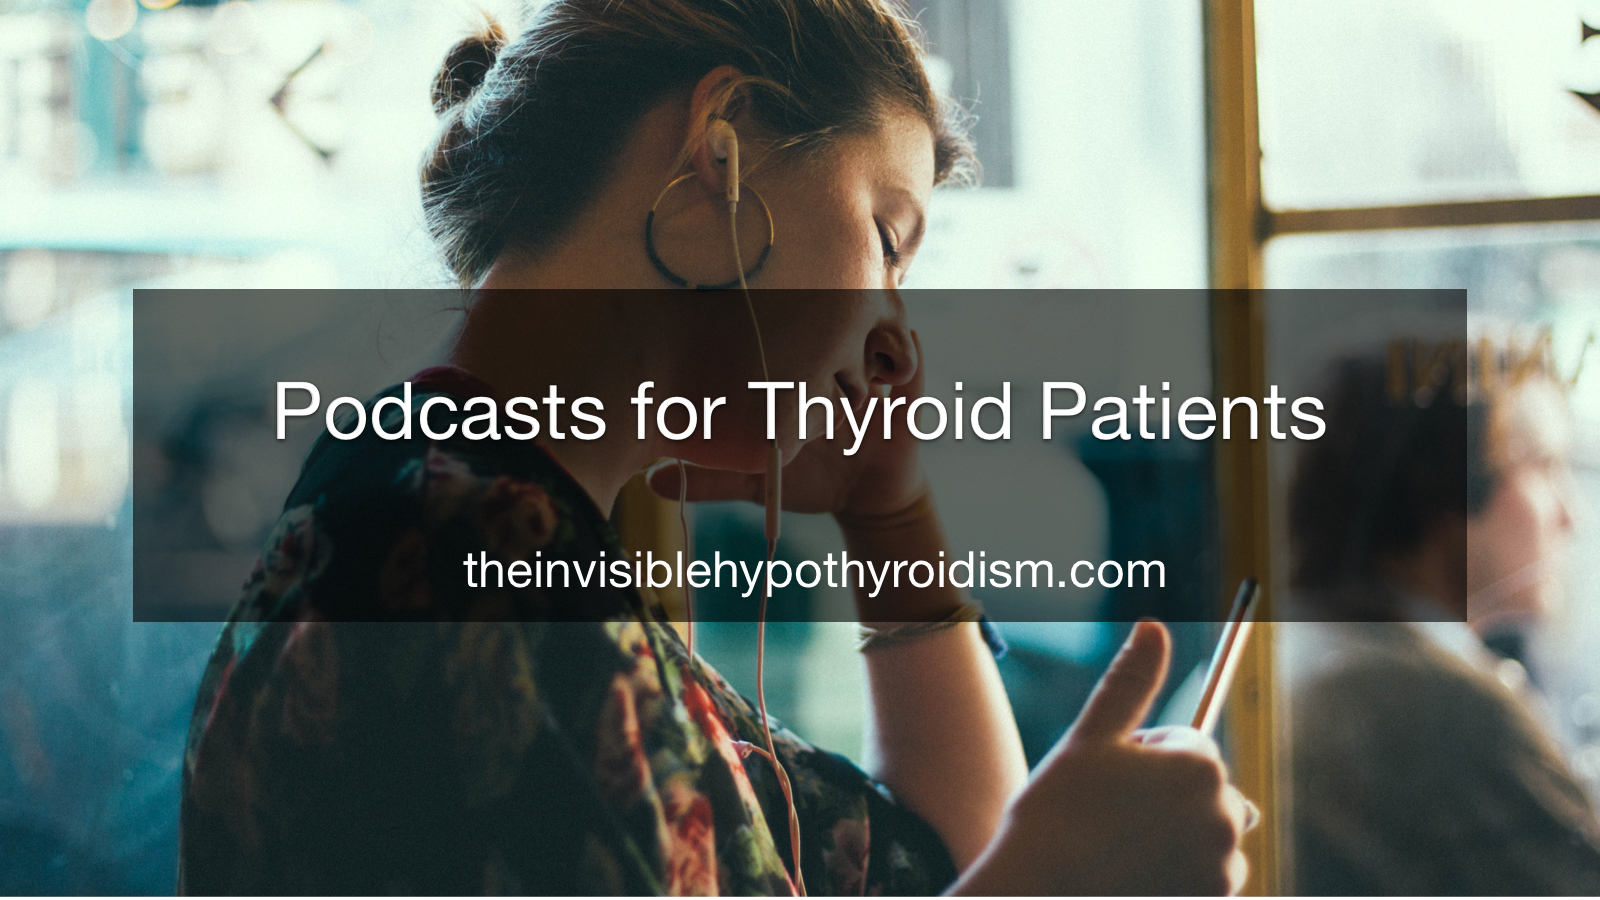 Podcasts for Thyroid Patients